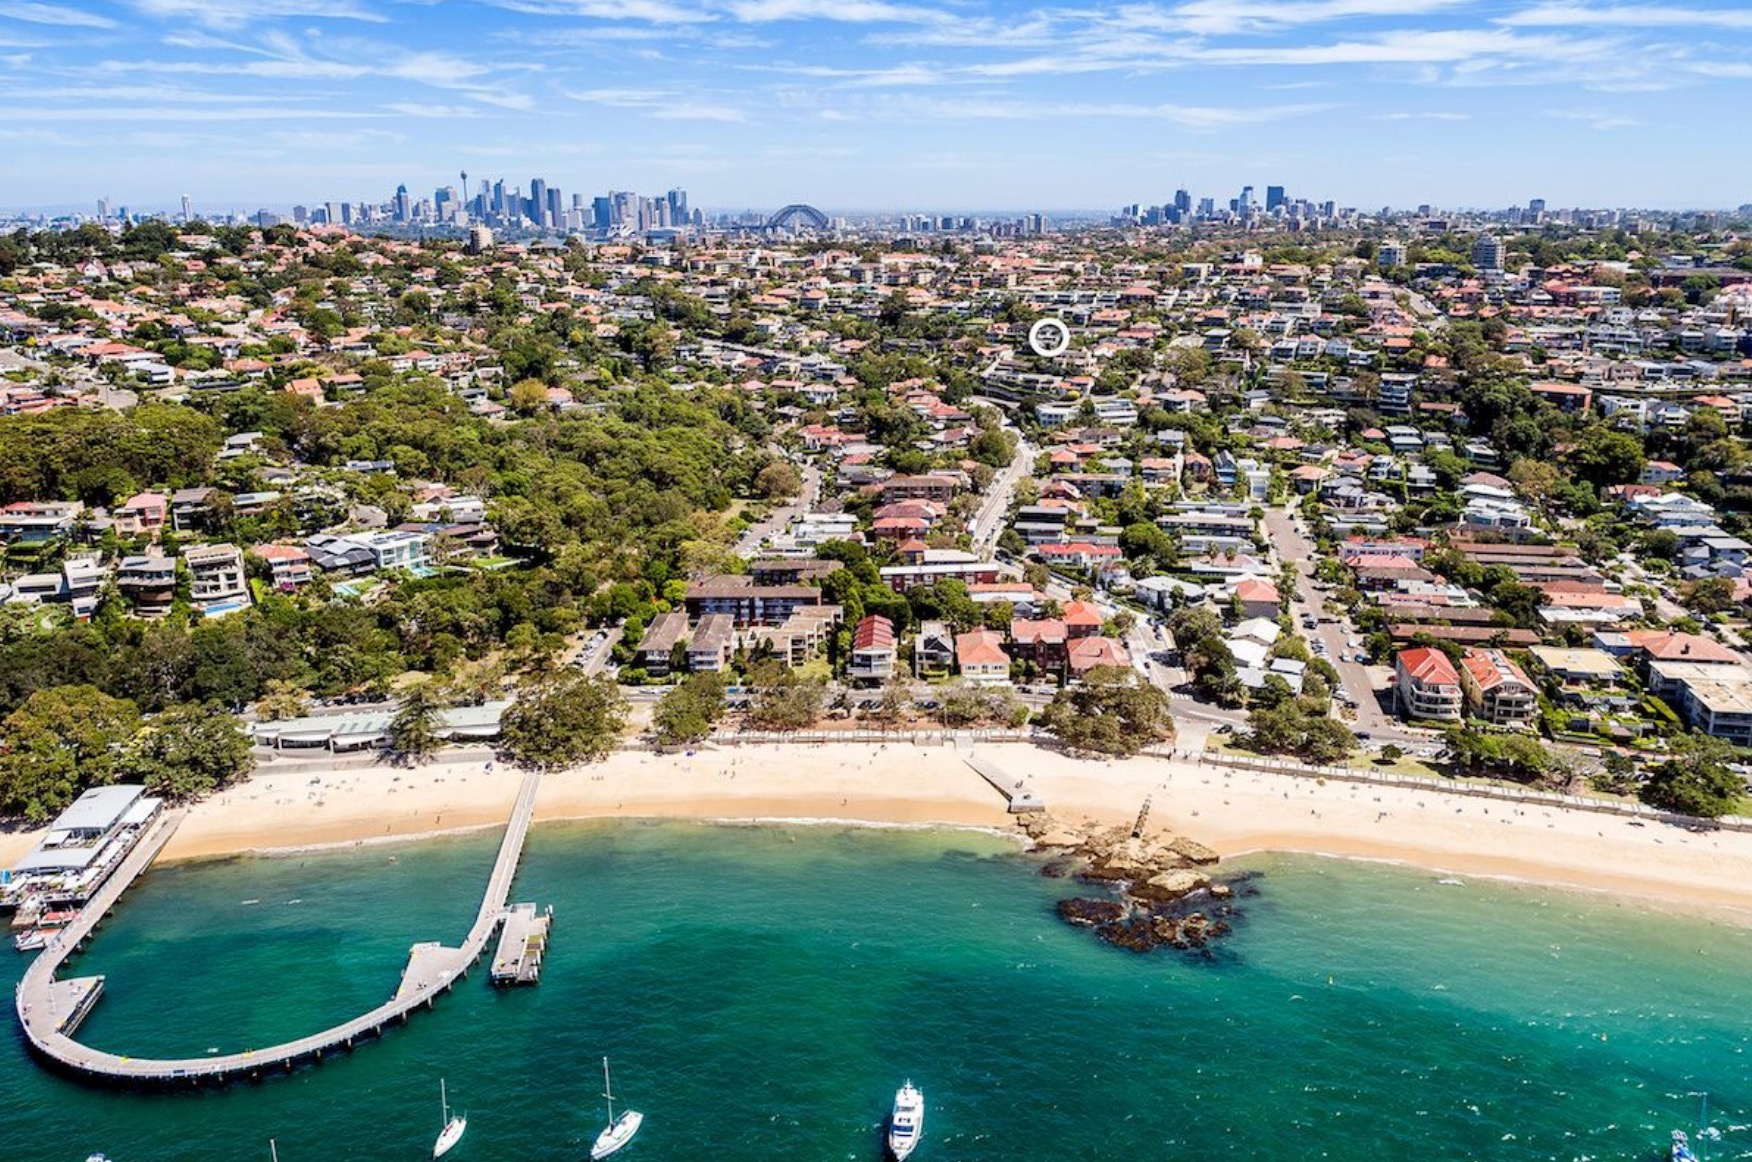 This home at Redan Street Mosman NSW is listed with De Brennan Property Mosman